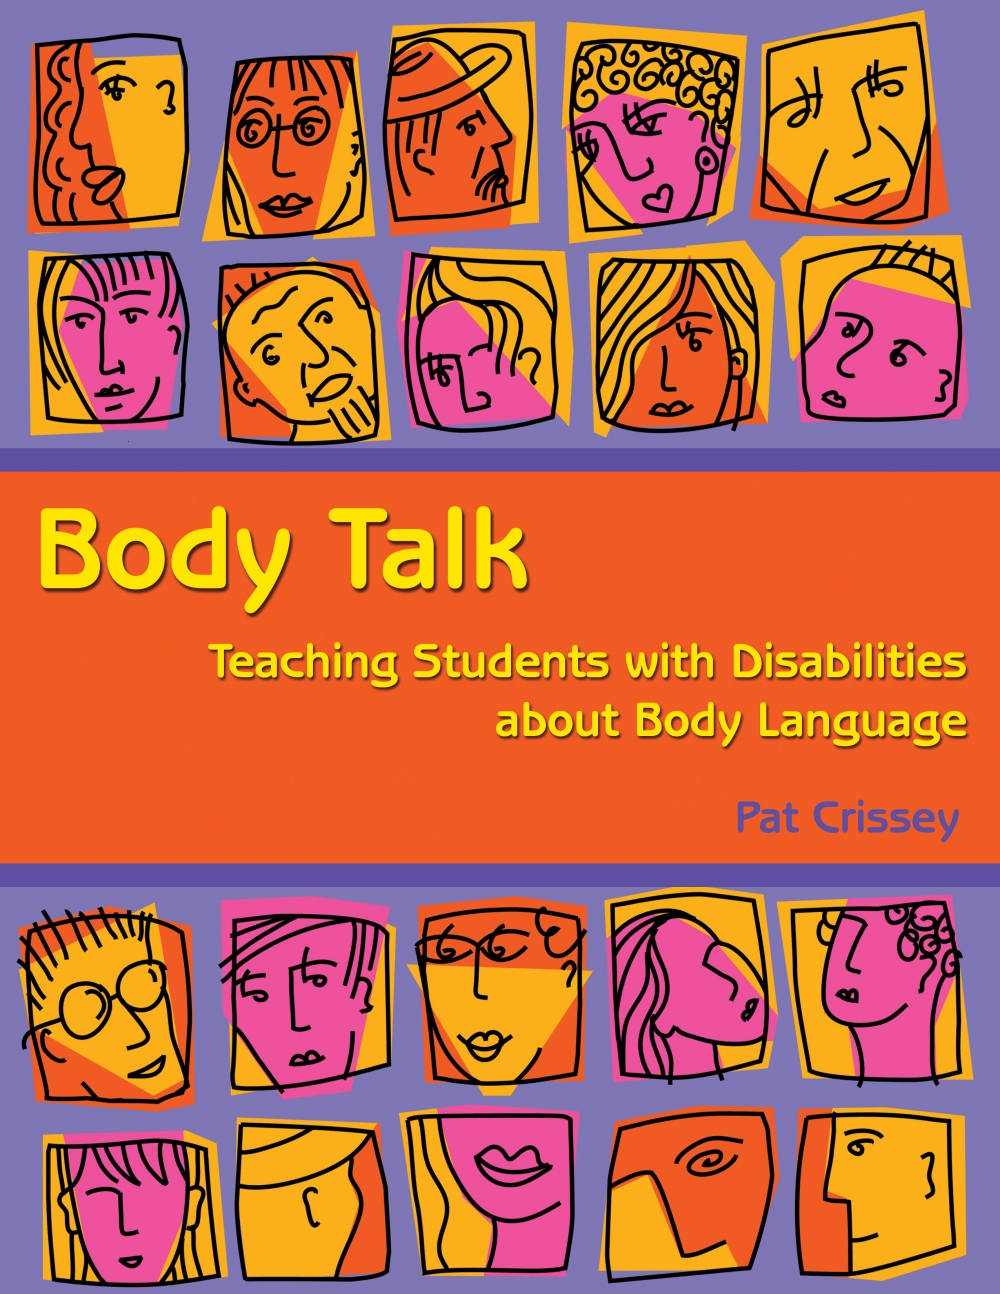 body talk book review